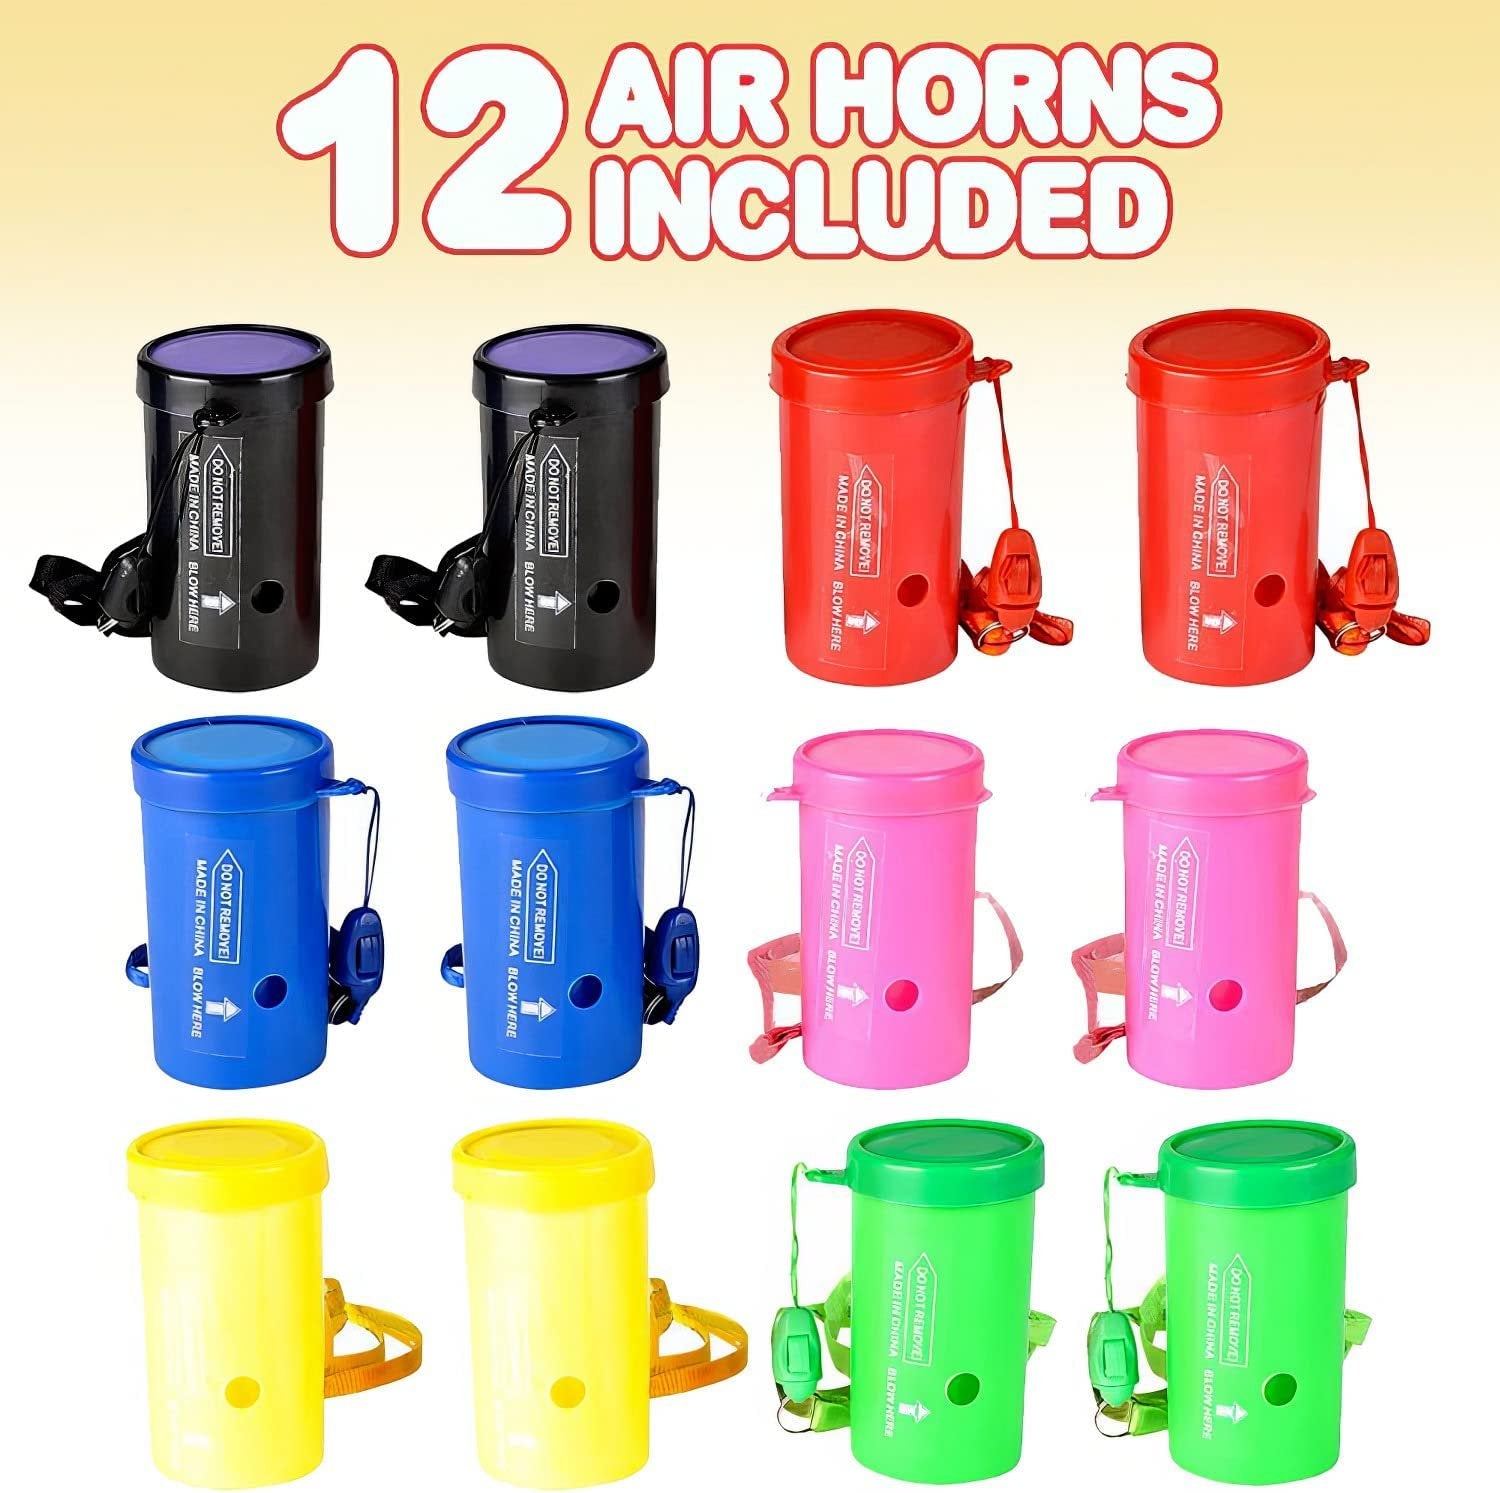 3" Mini Air Horns - Pack of 12 - Noisemakers for Sporting Events, Parties, Celebrations, Fun Birthday Party Favors and Goodie Bag Fillers for Kids and Adults